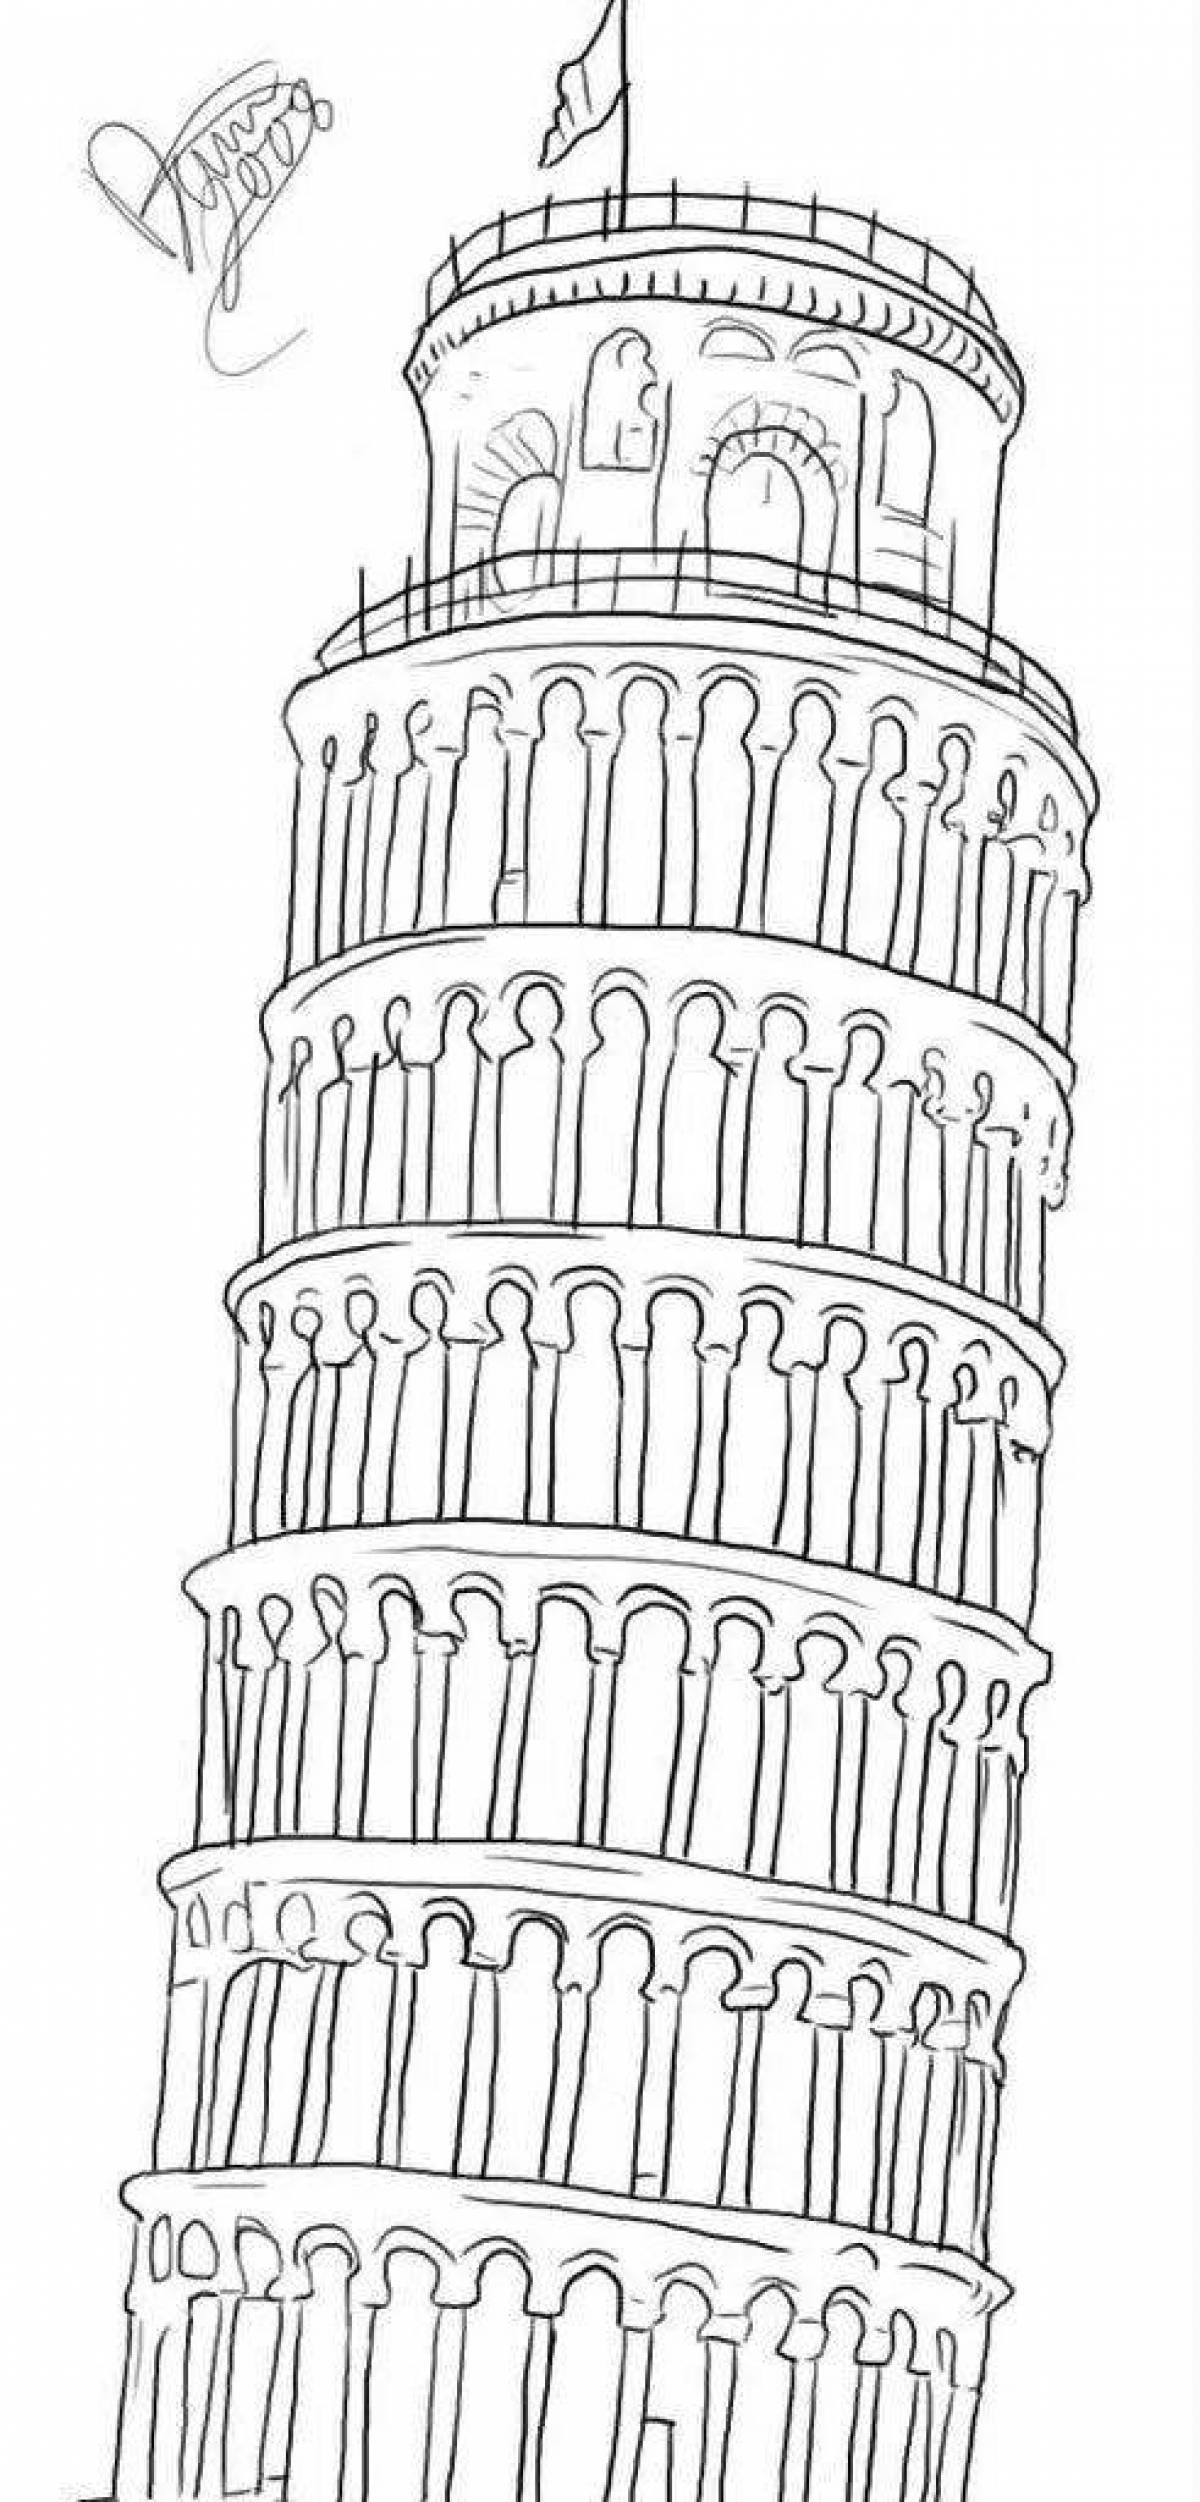 Exciting coloring of the Leaning Tower of Pisa